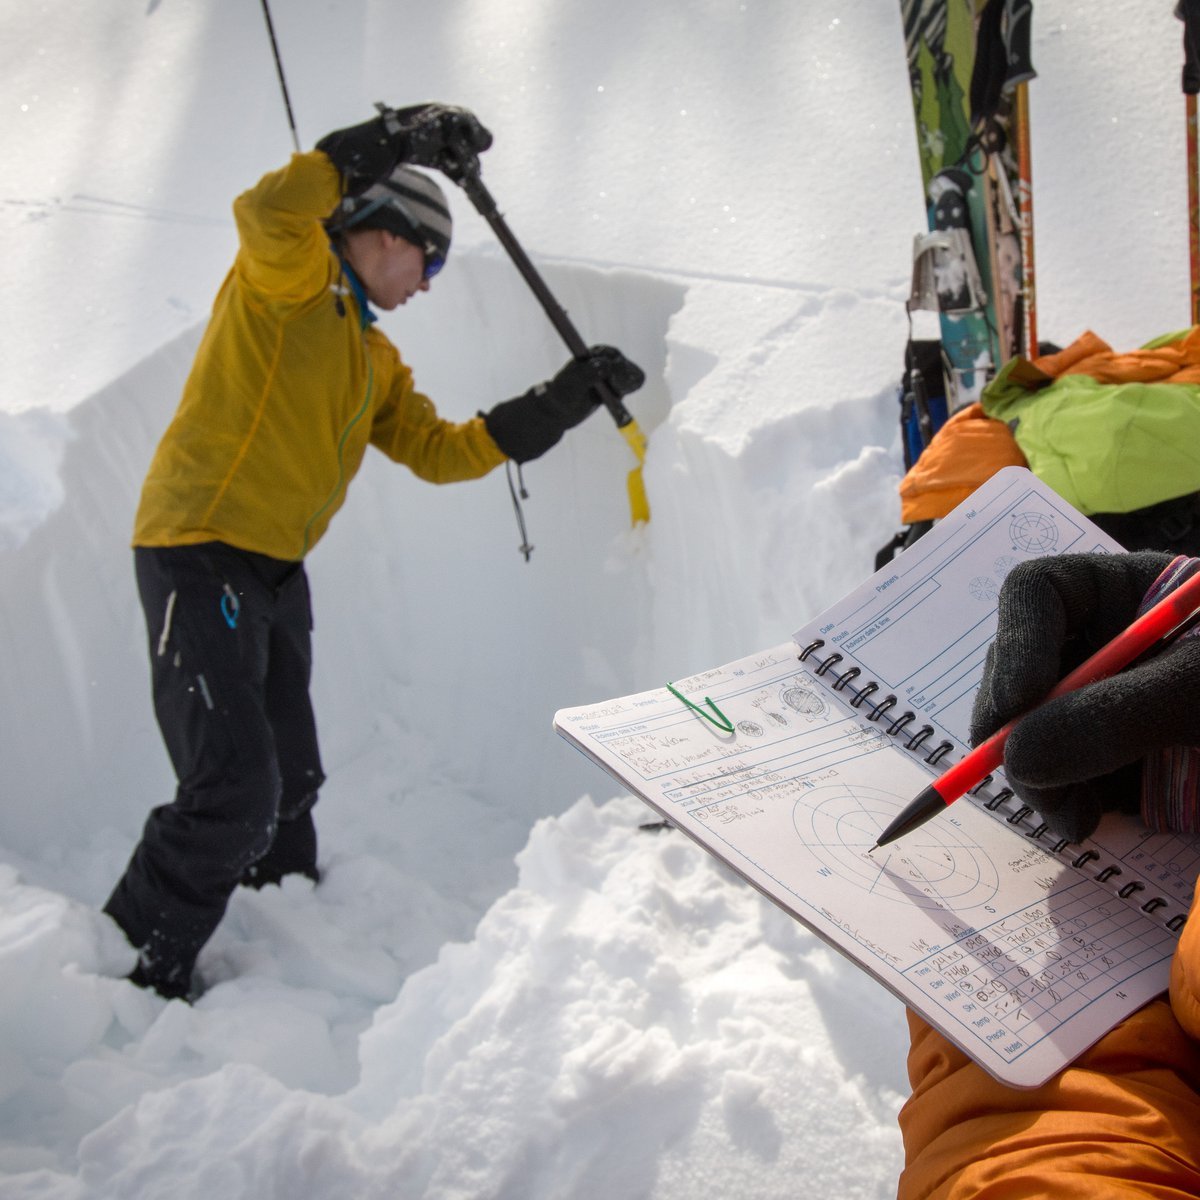 Digging a snow pit and taking notes during avalanche training